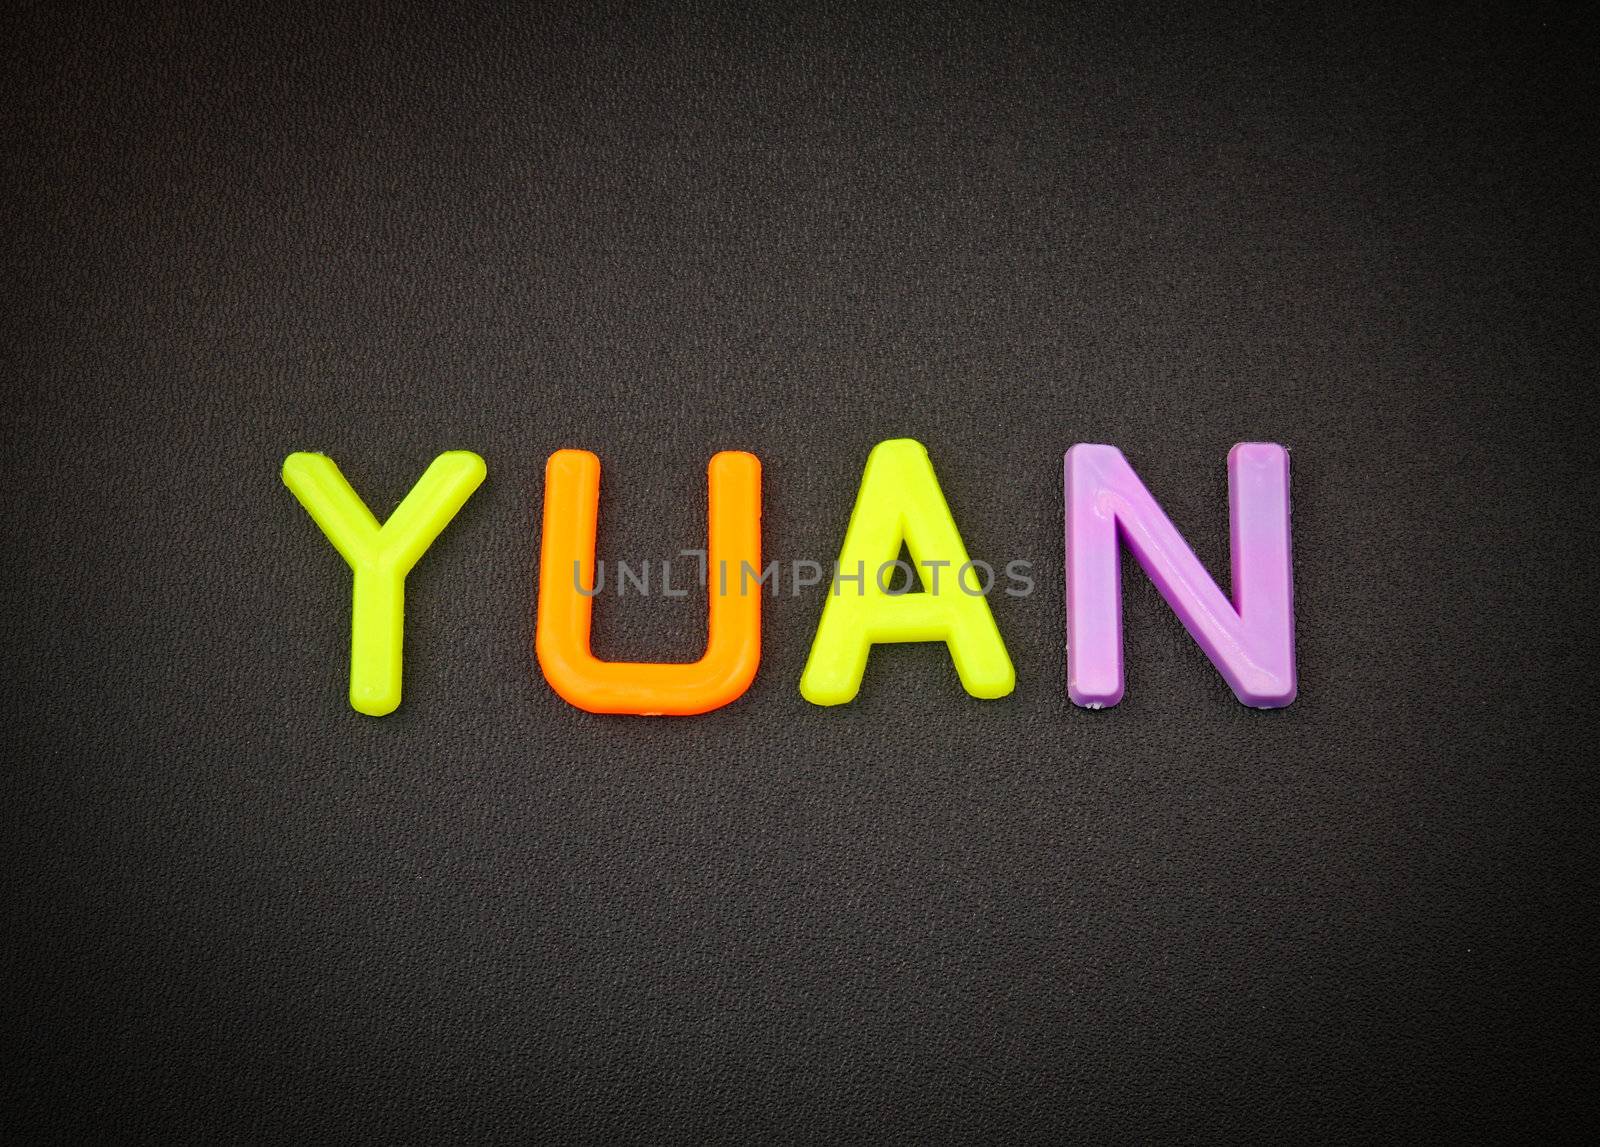 Yuan in colorful toy letters on black background